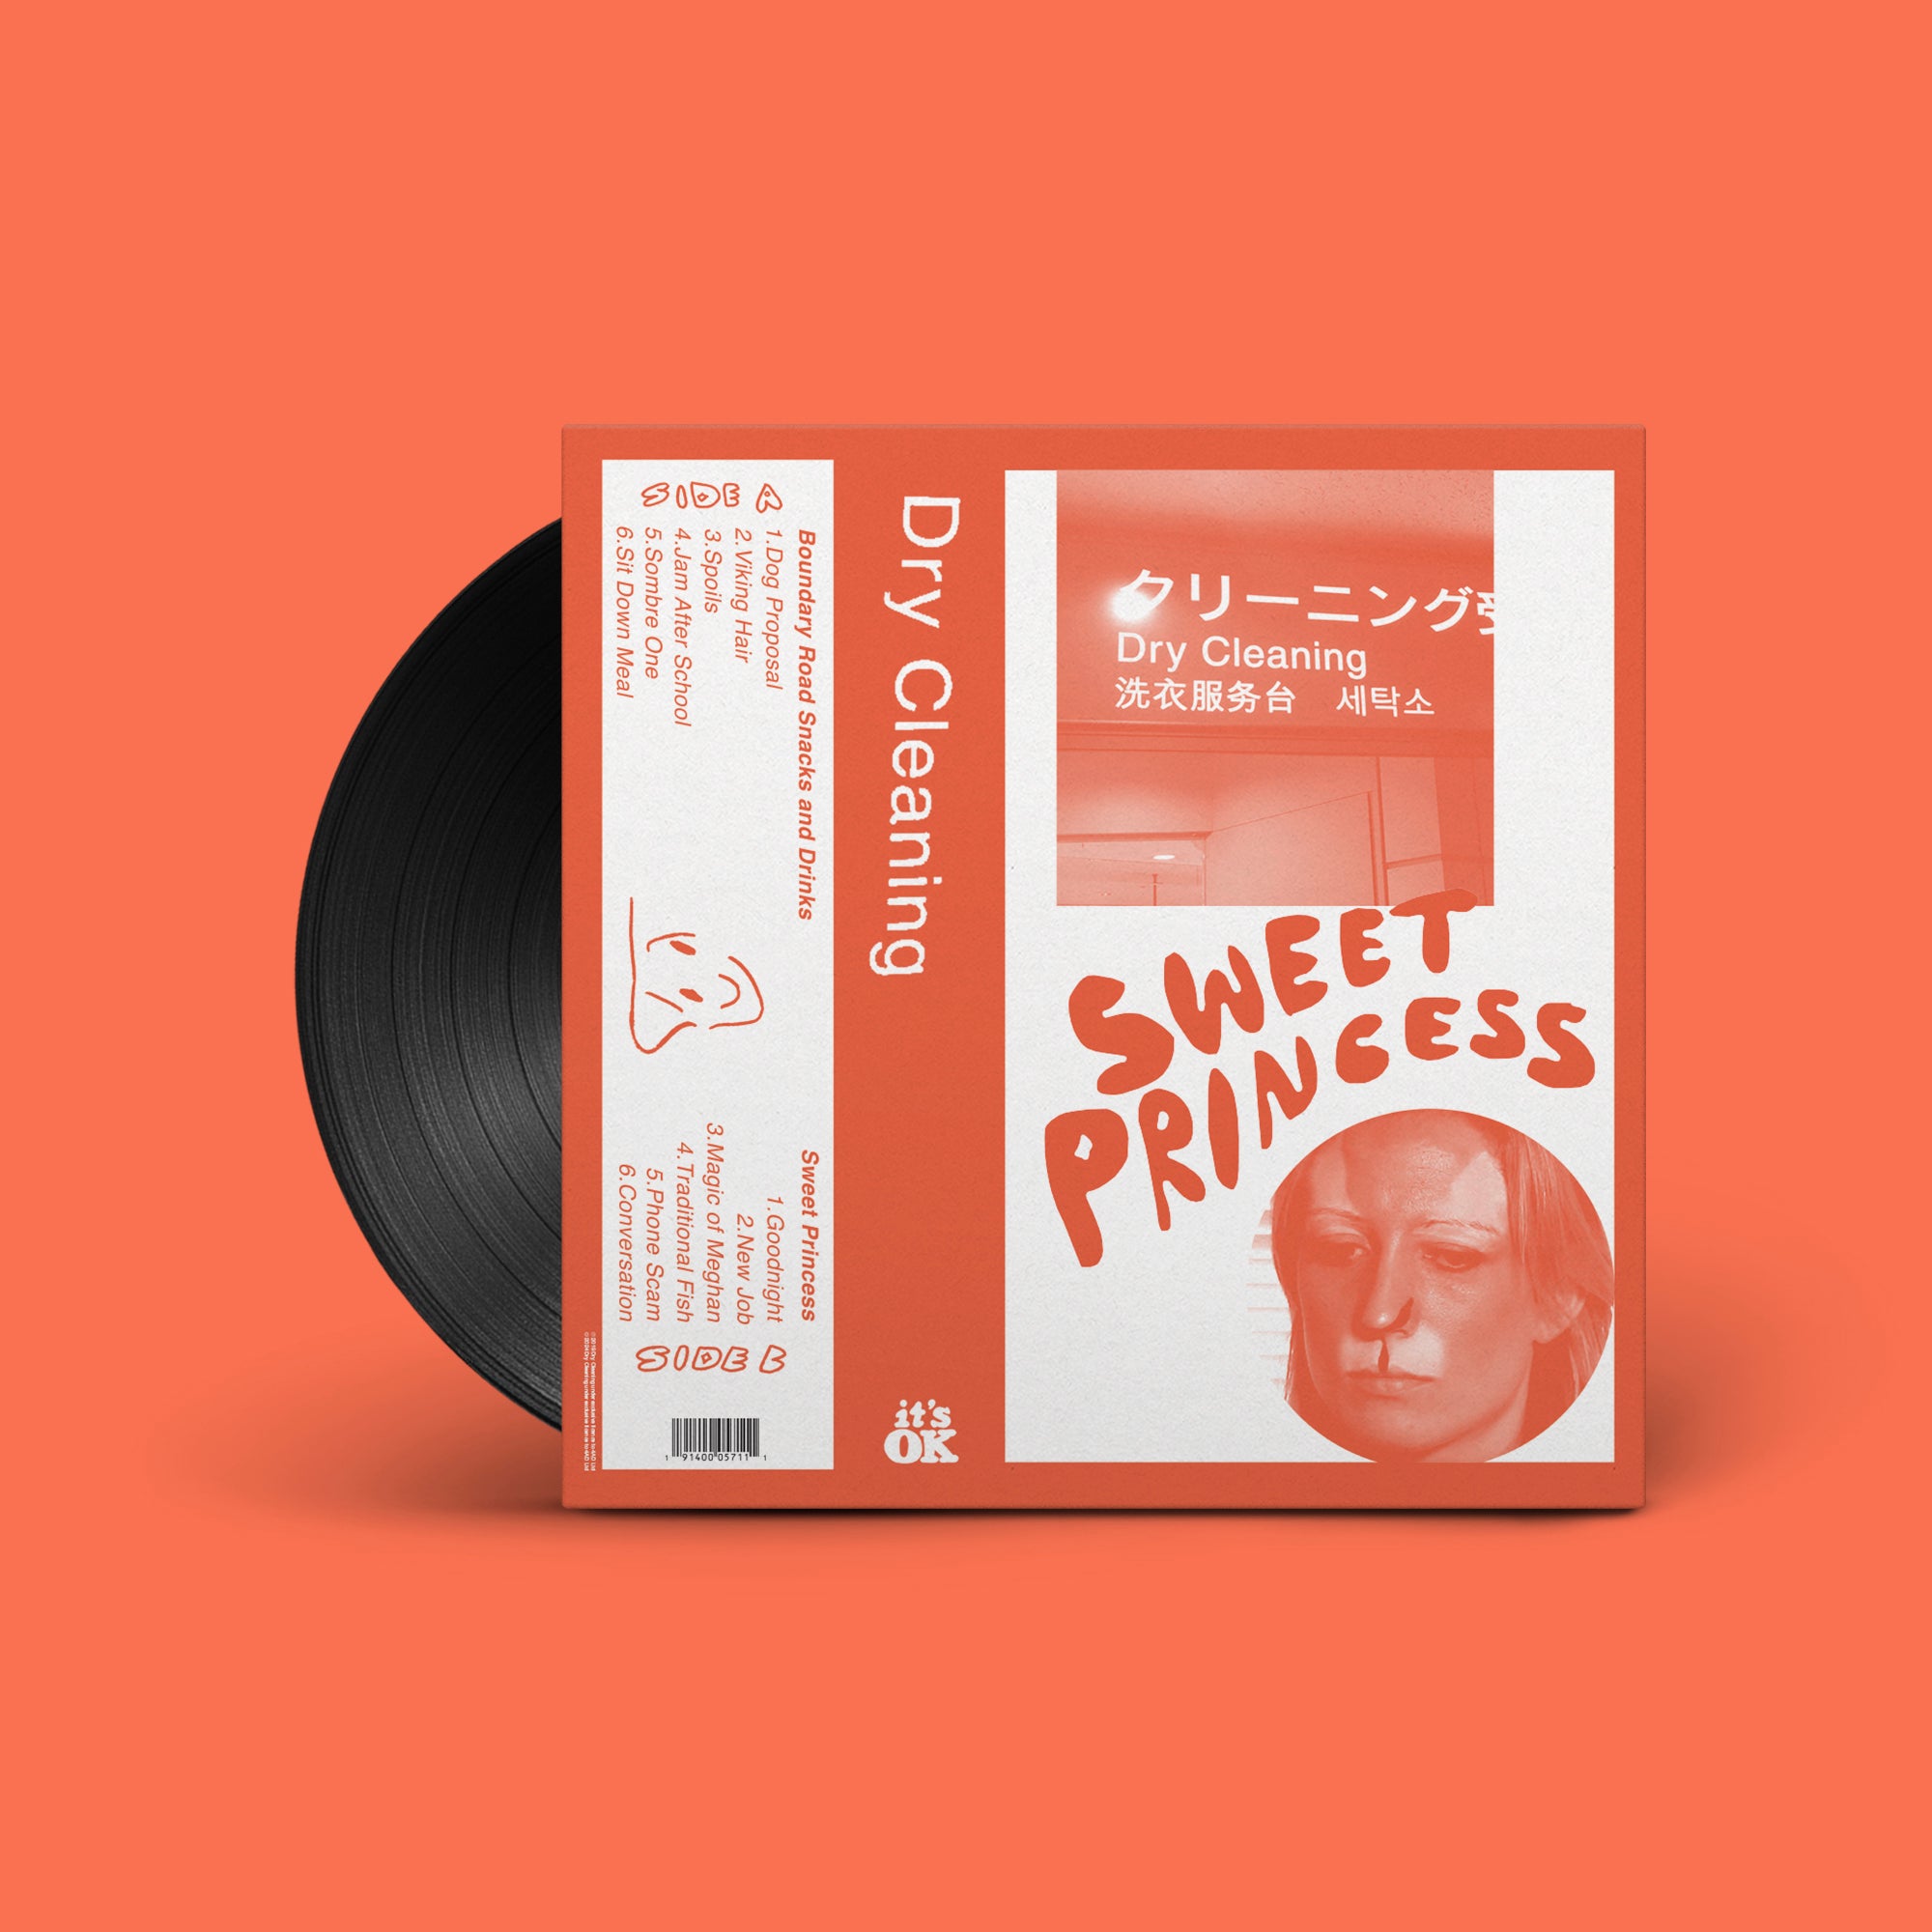 Dry Cleaning - Boundary Road Snacks and Drinks + Sweet Princess EP: Vinyl LP